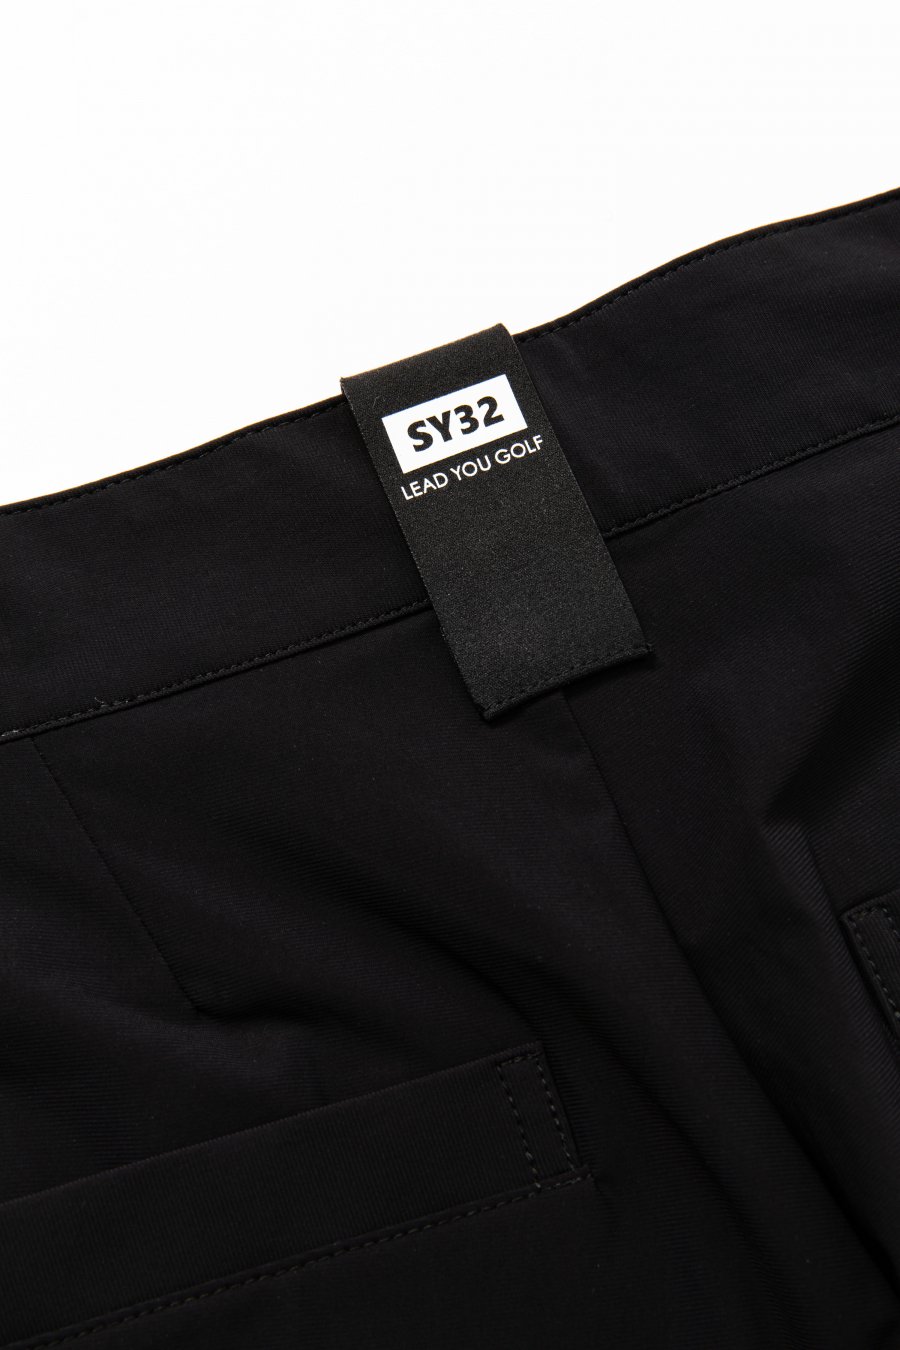 【30%OFF】STRETCH HALF PANTS｜MEN'S<img class='new_mark_img2' src='https://img.shop-pro.jp/img/new/icons20.gif' style='border:none;display:inline;margin:0px;padding:0px;width:auto;' />